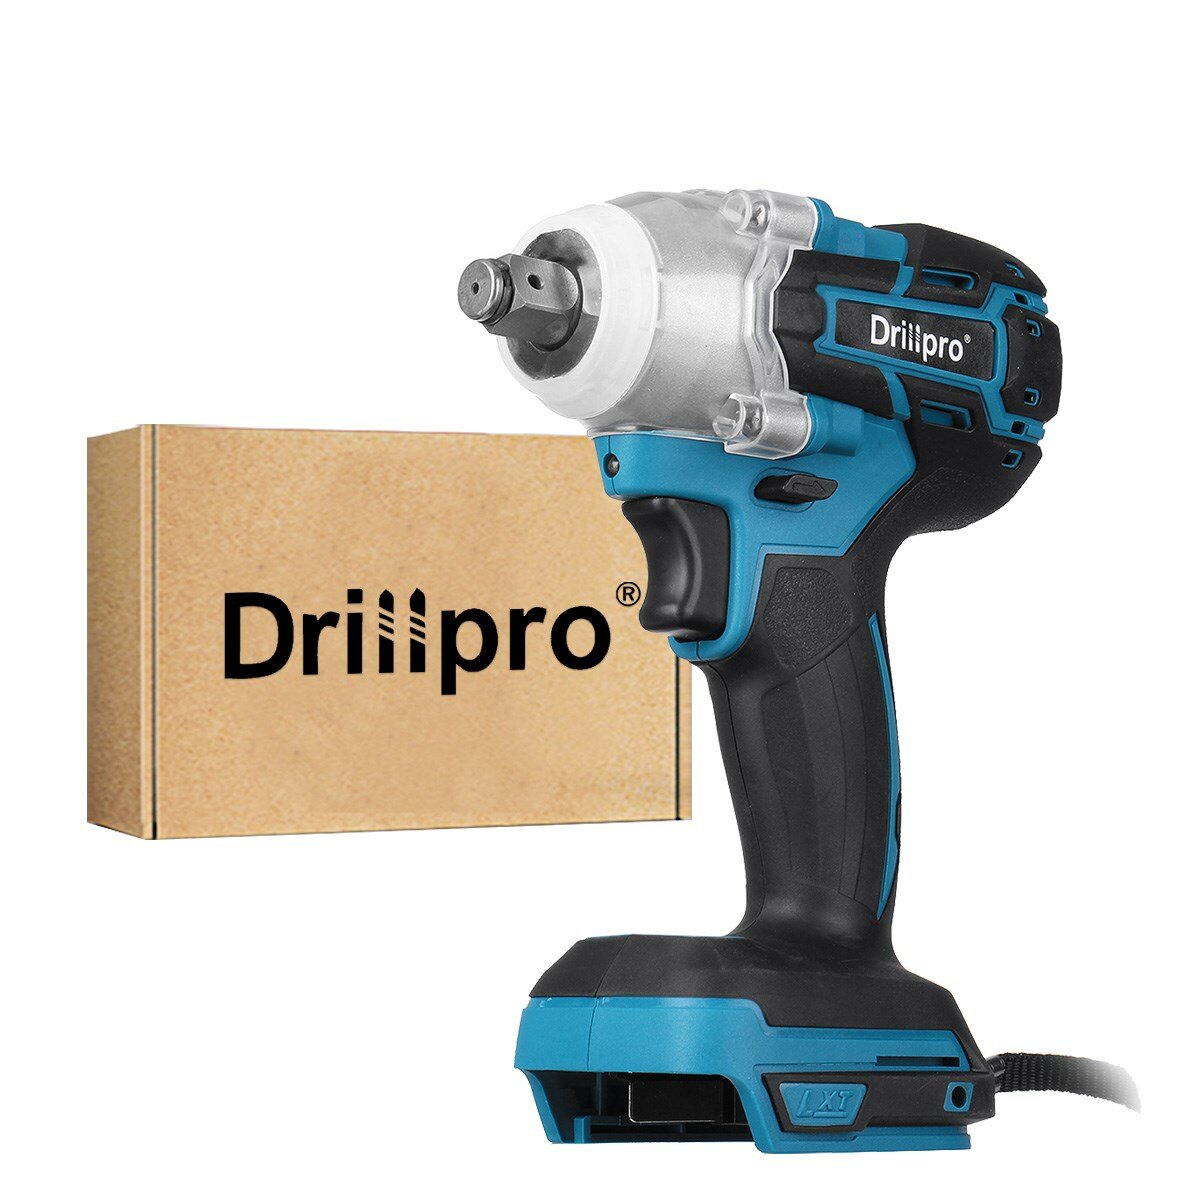 best price,drillpro,18v,3200rpm,impact,wrench,brushless,eu,discount